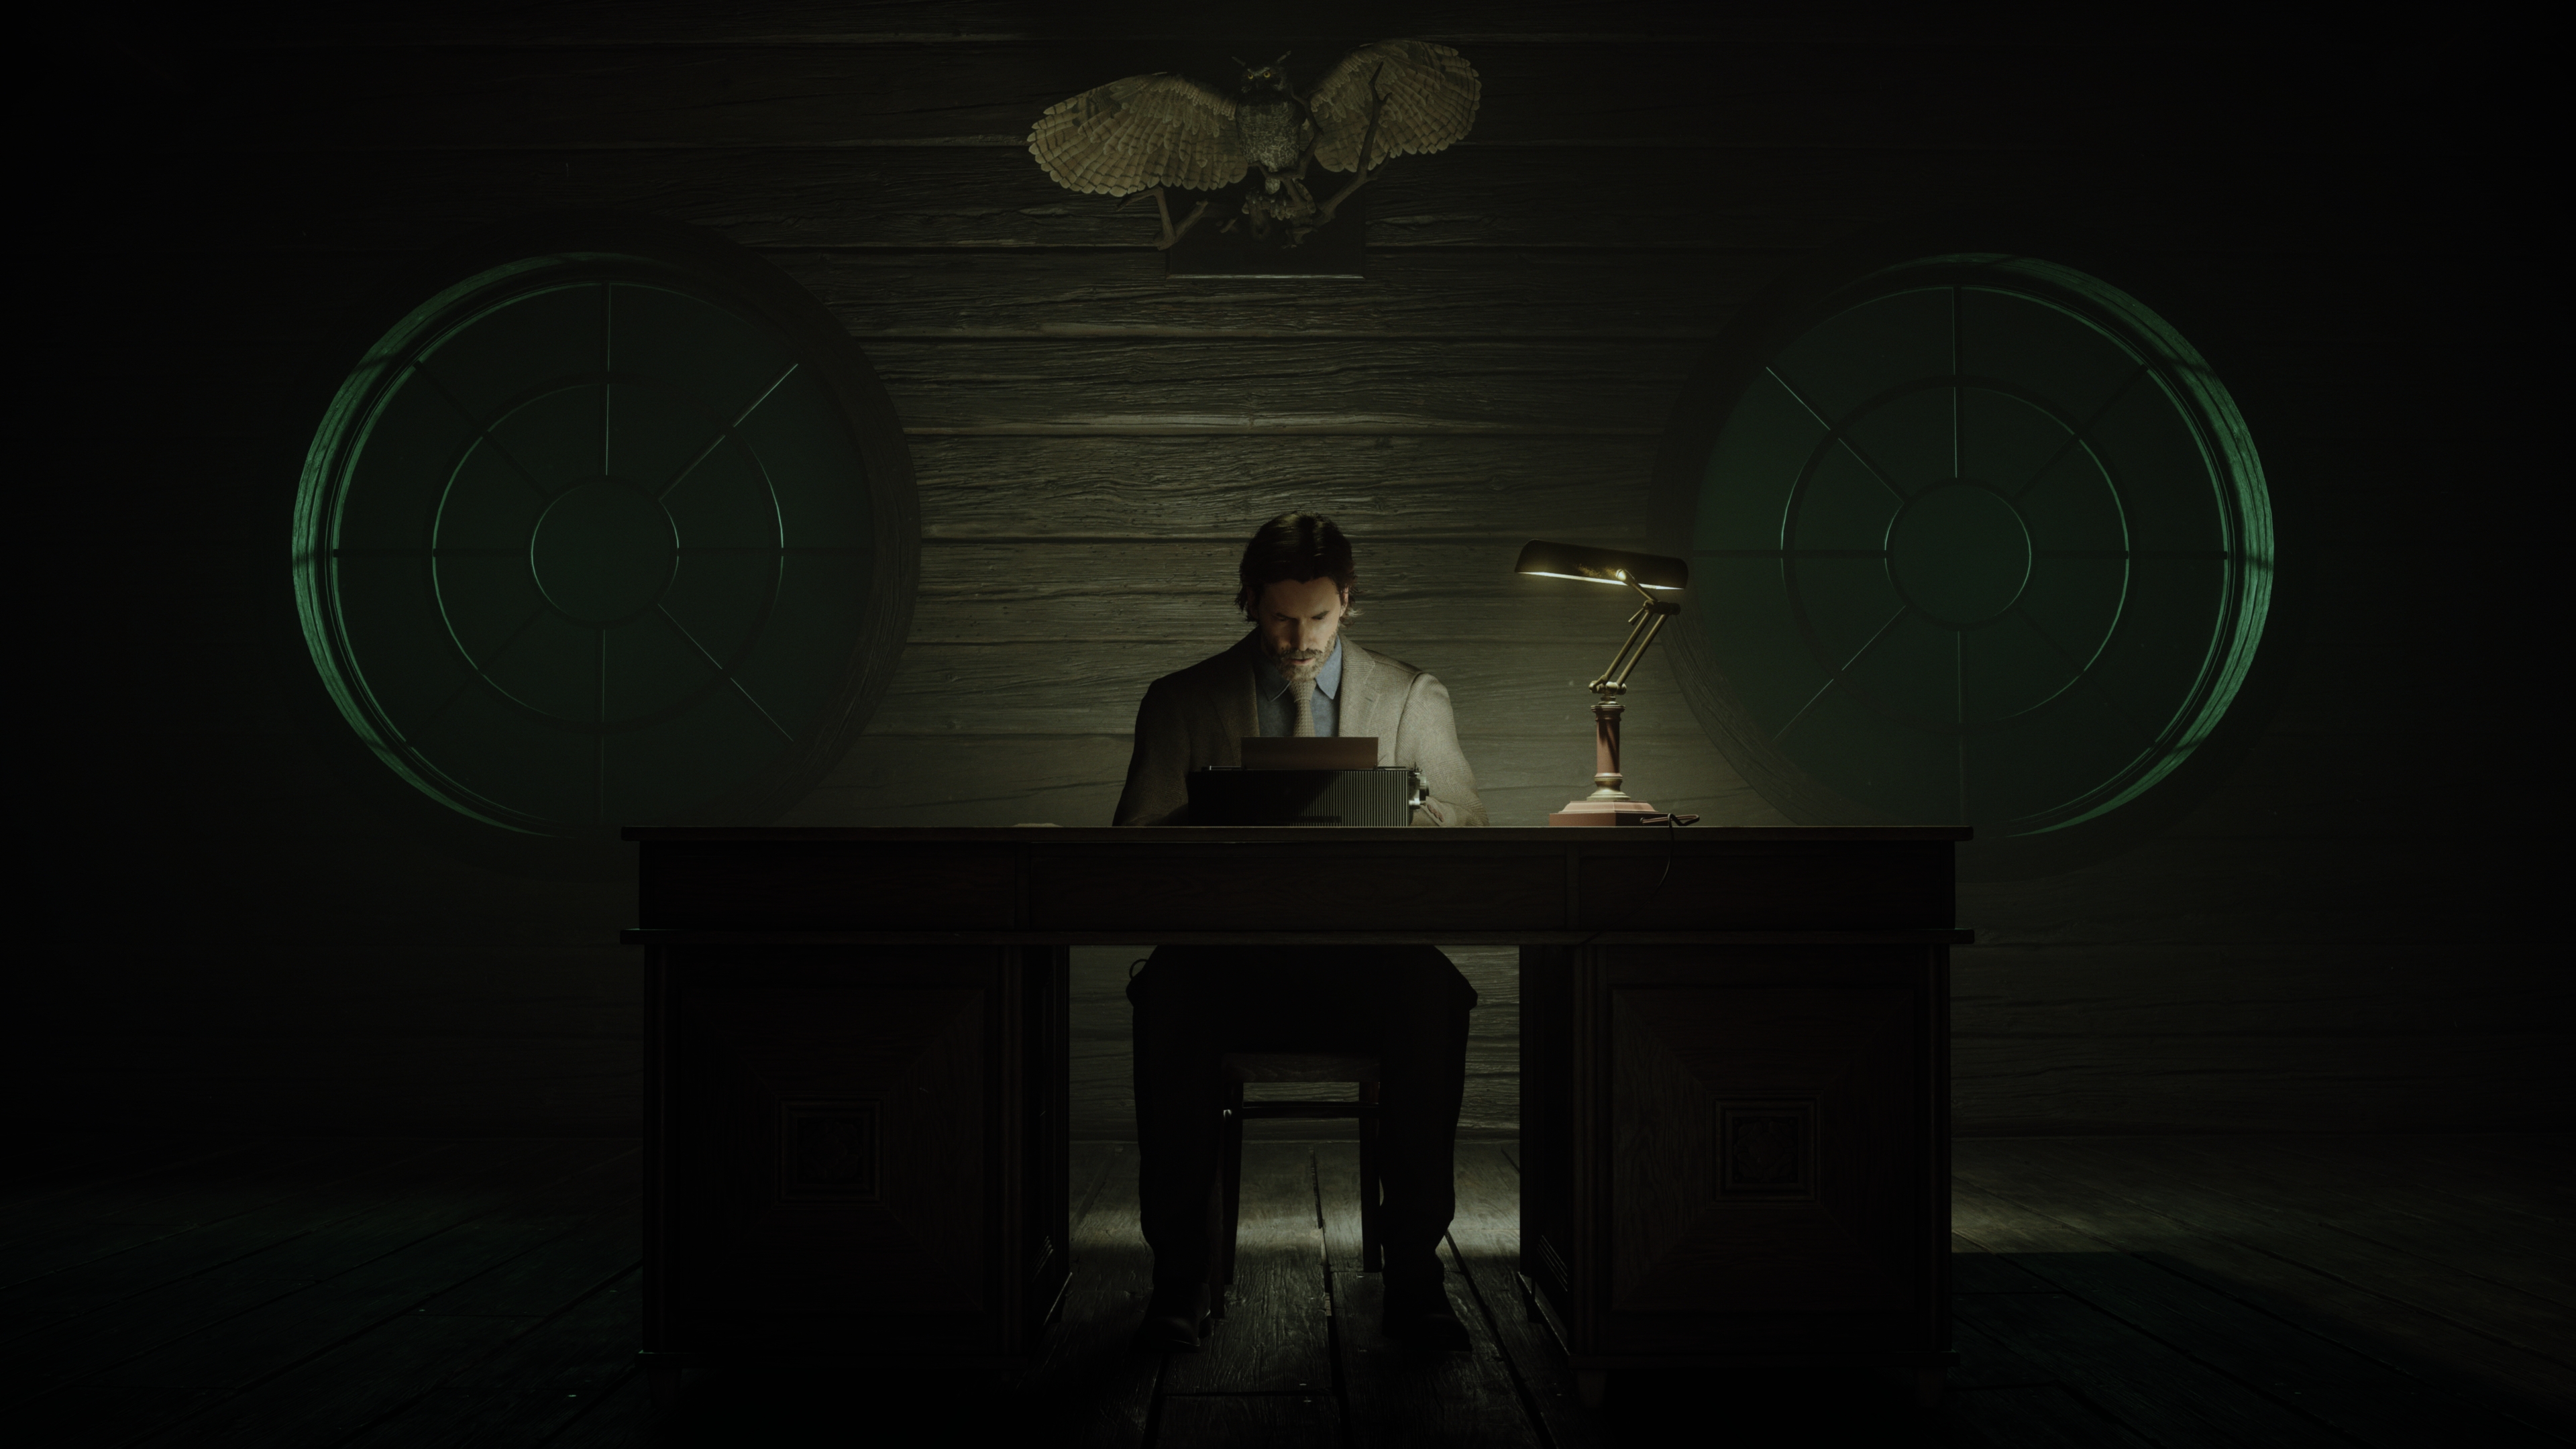 Console Players Will Be 'Very Positively Surprised' by Alan Wake 2